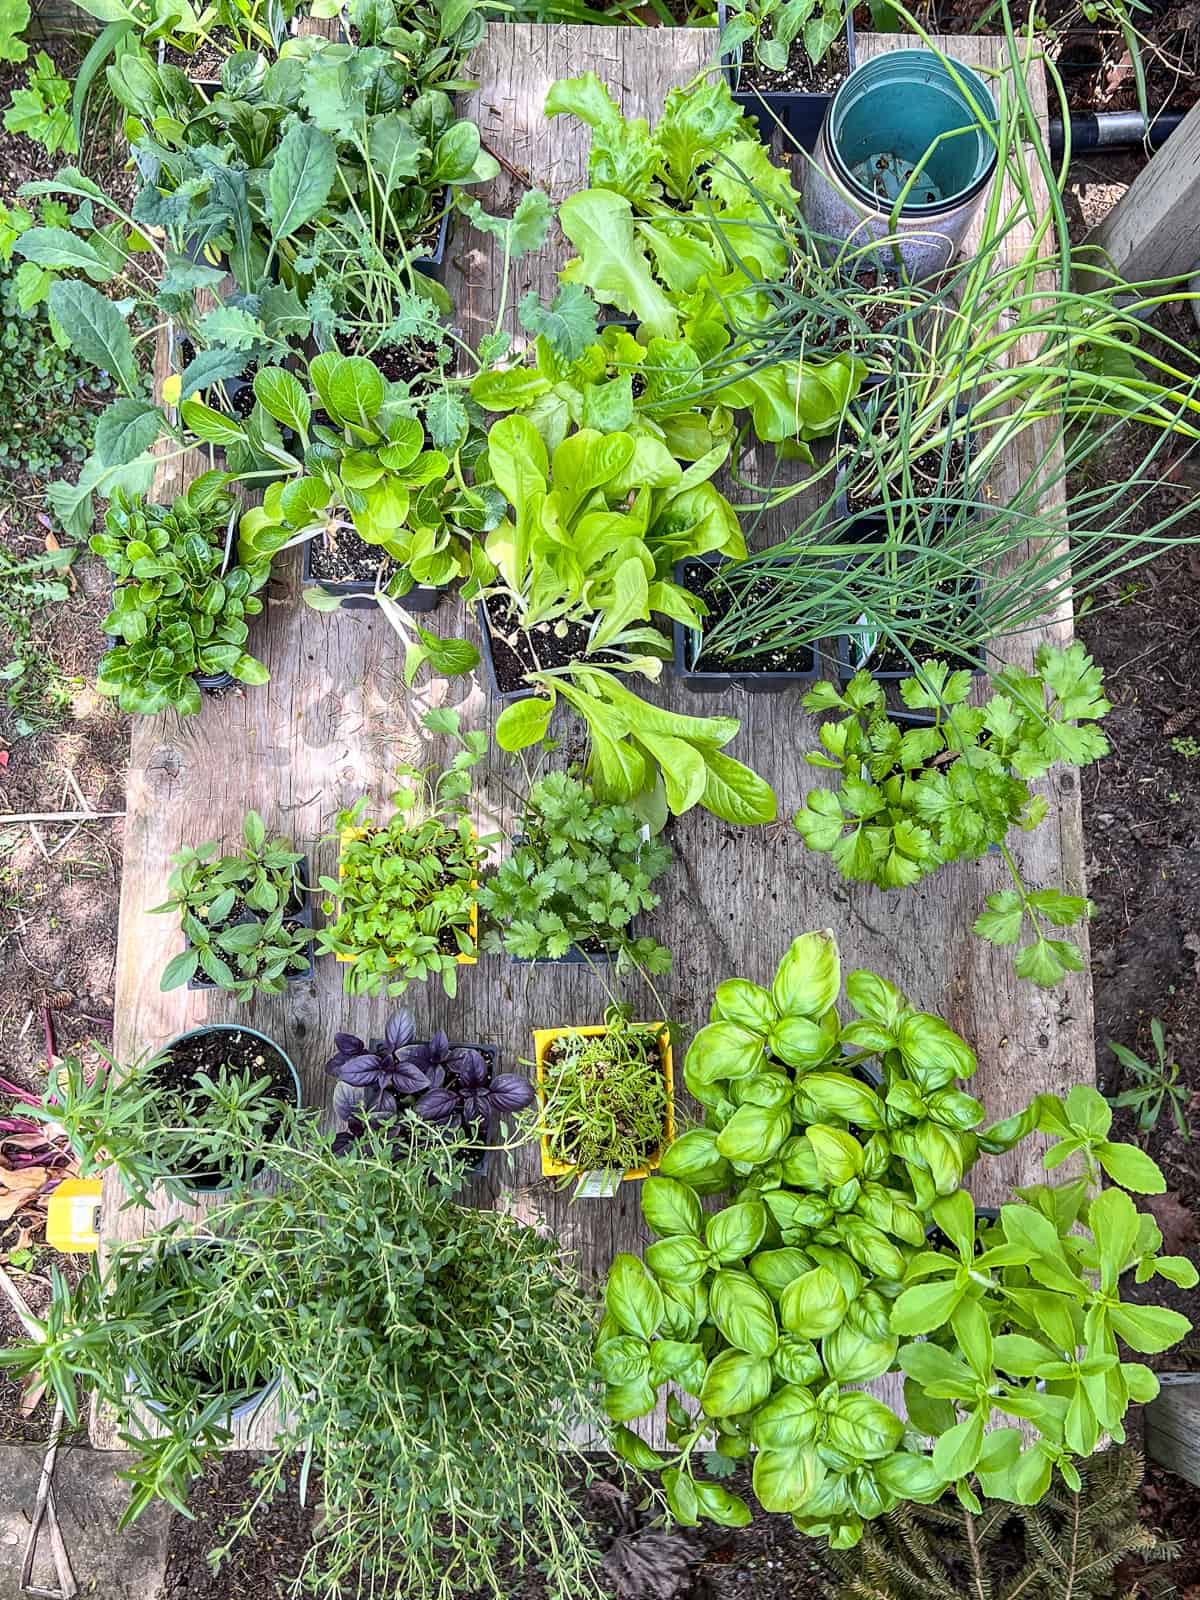 An image of a wooden table filled with seedlings ready for the garden.